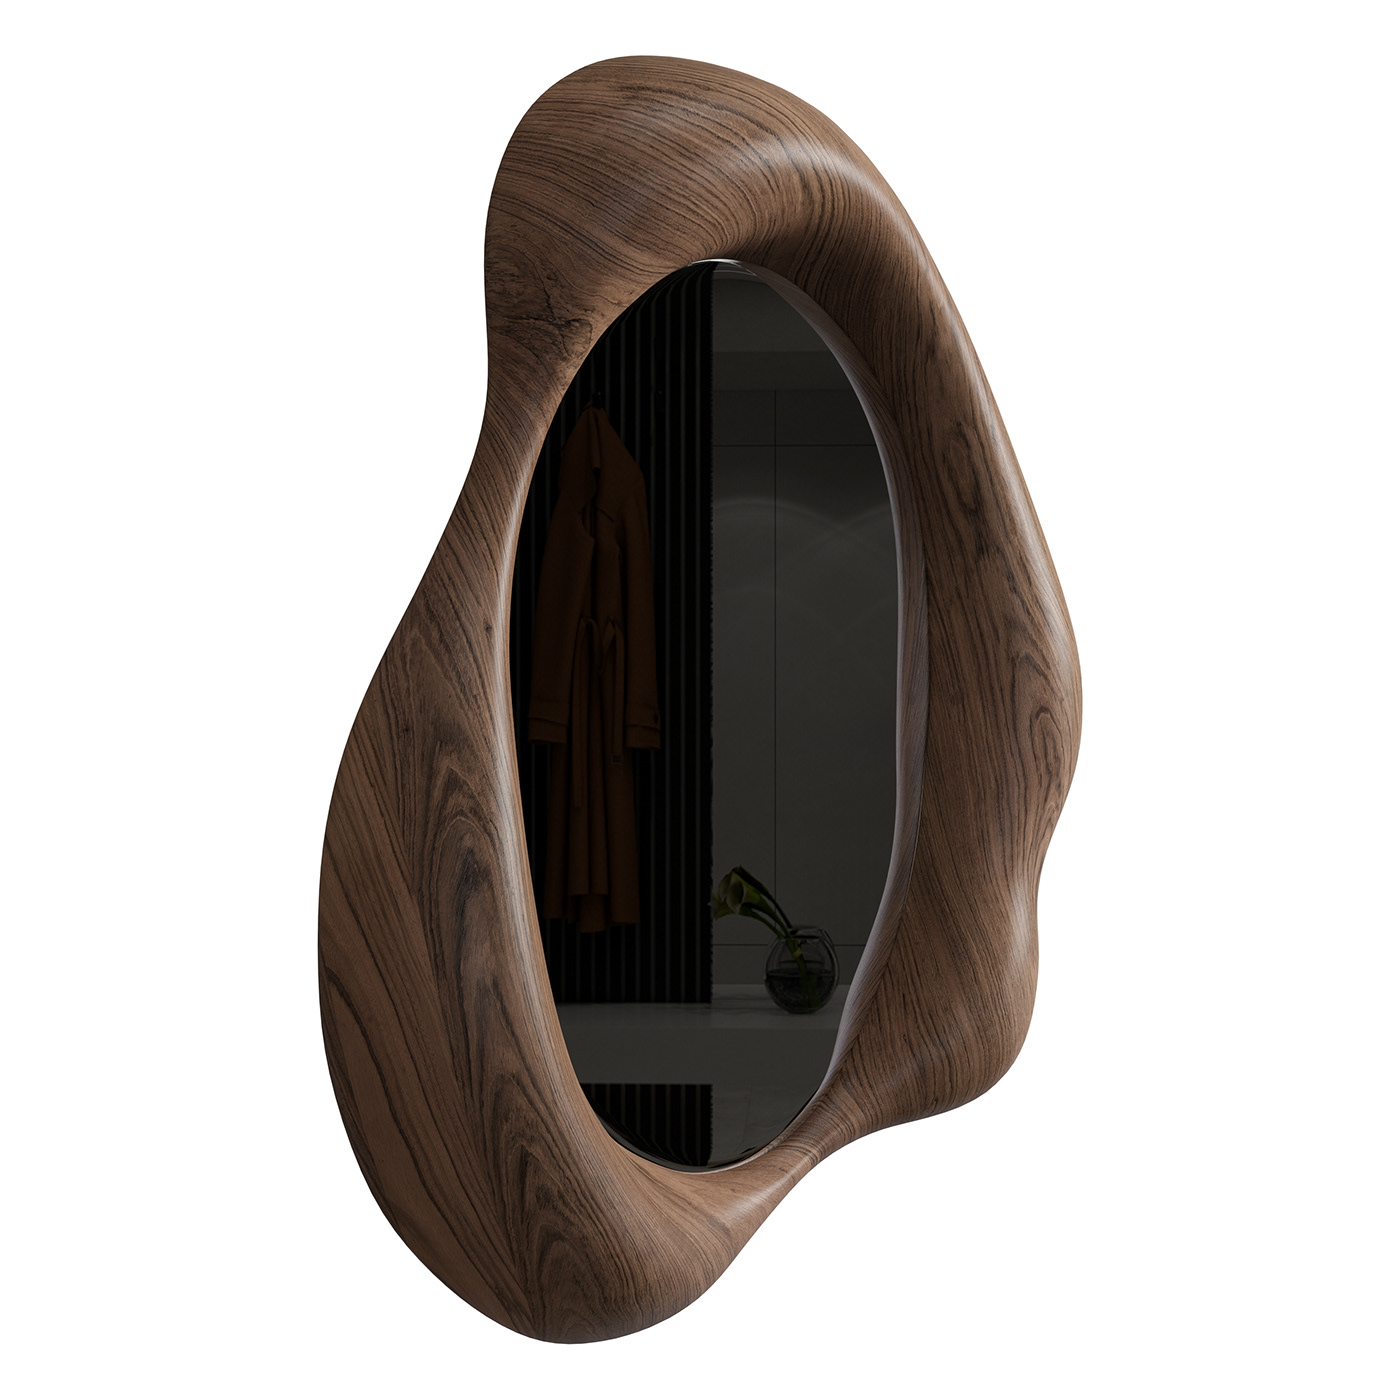 3dmodeling 3dsky 3dsmax antropology architecture cgmood cgtrader Lemieux  mirror modeling